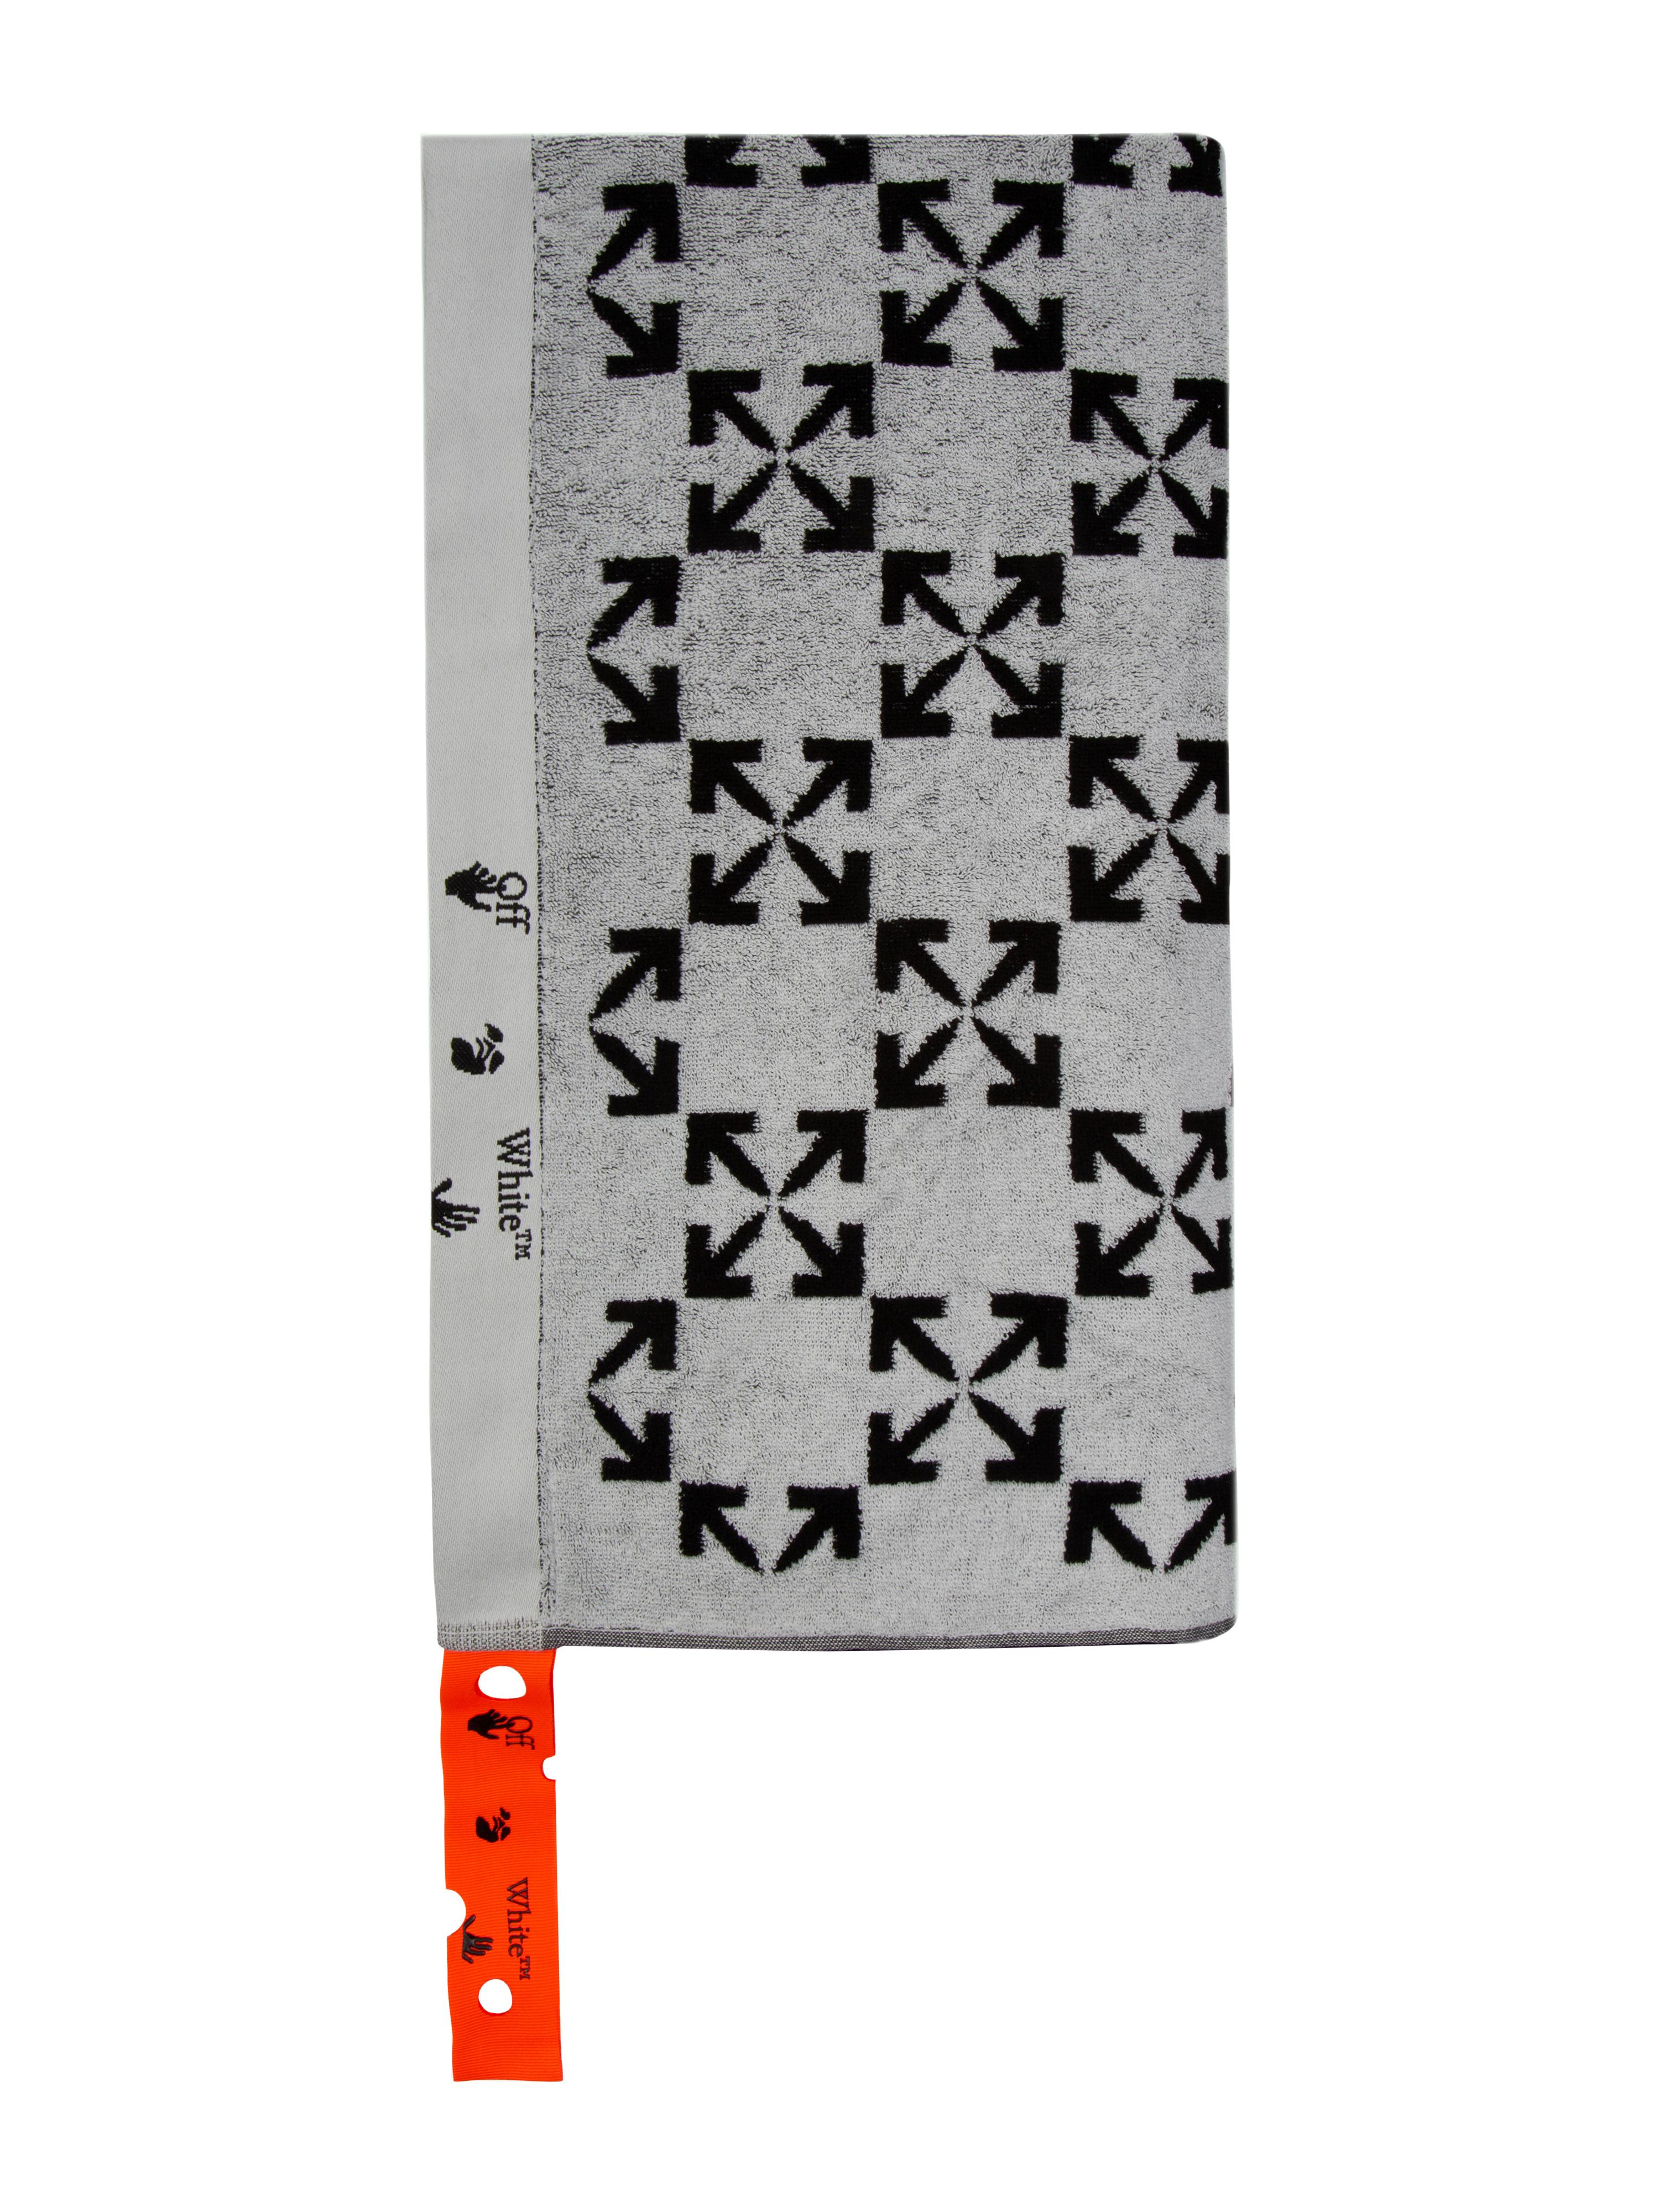 Arrow pattern shower towel. Black arrows on white base in jacquard and orange “HOME” label. Man Swimming Logo carved at hems.
By Virgil Abloh
Dimensions: 150 W x 100 H
This item is only available to be purchased and shipped to the United States.